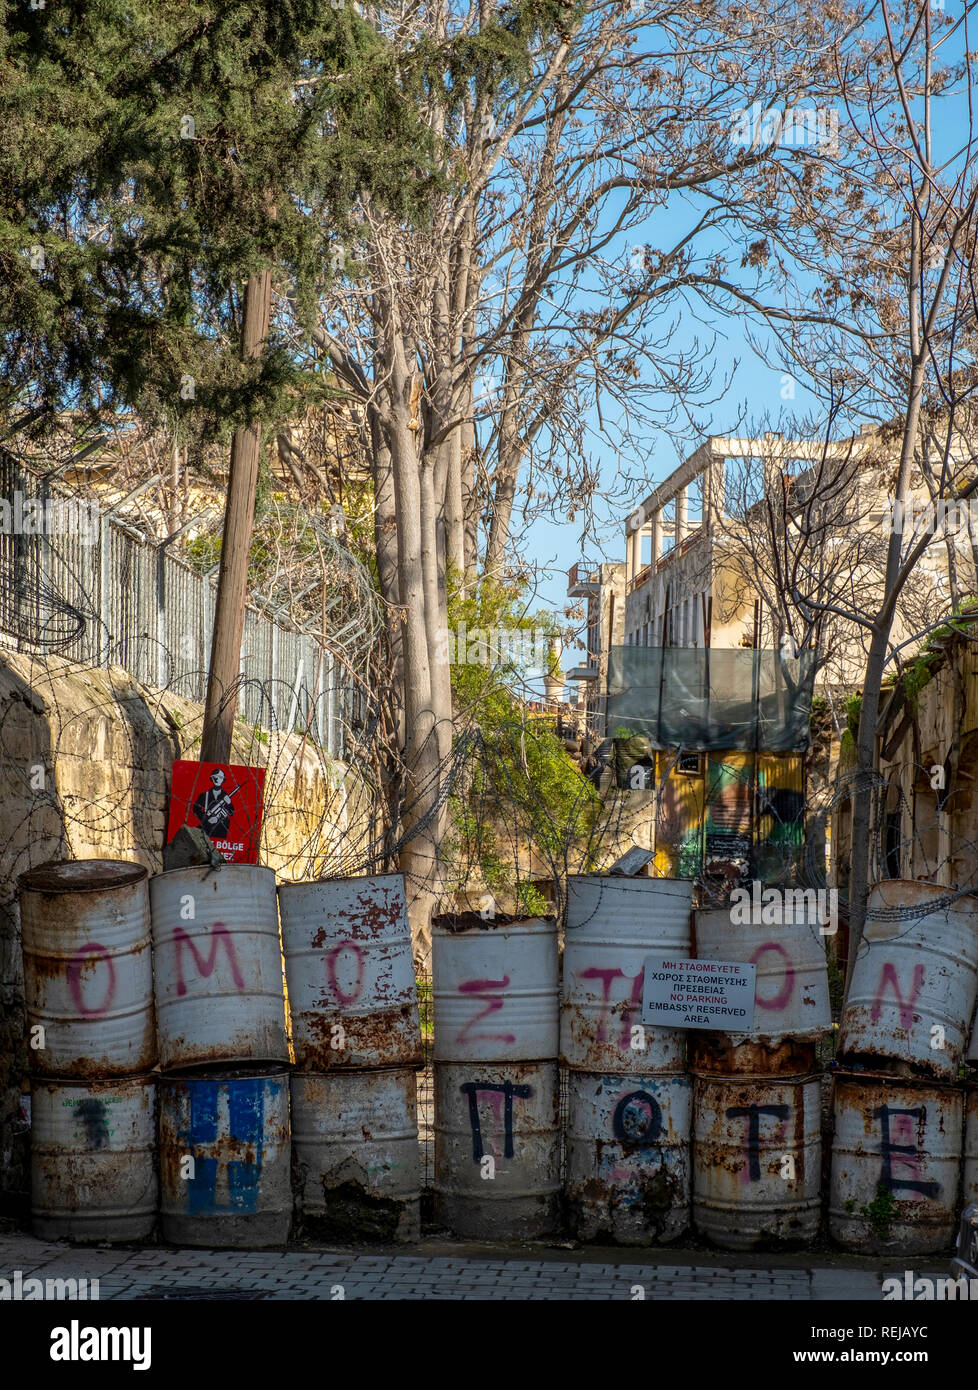 A barrier across a street in the centre of Nicosia, Cyprus which marks the buffer zone between the Turkish and Greek Cypriot sides of the divided city Stock Photo